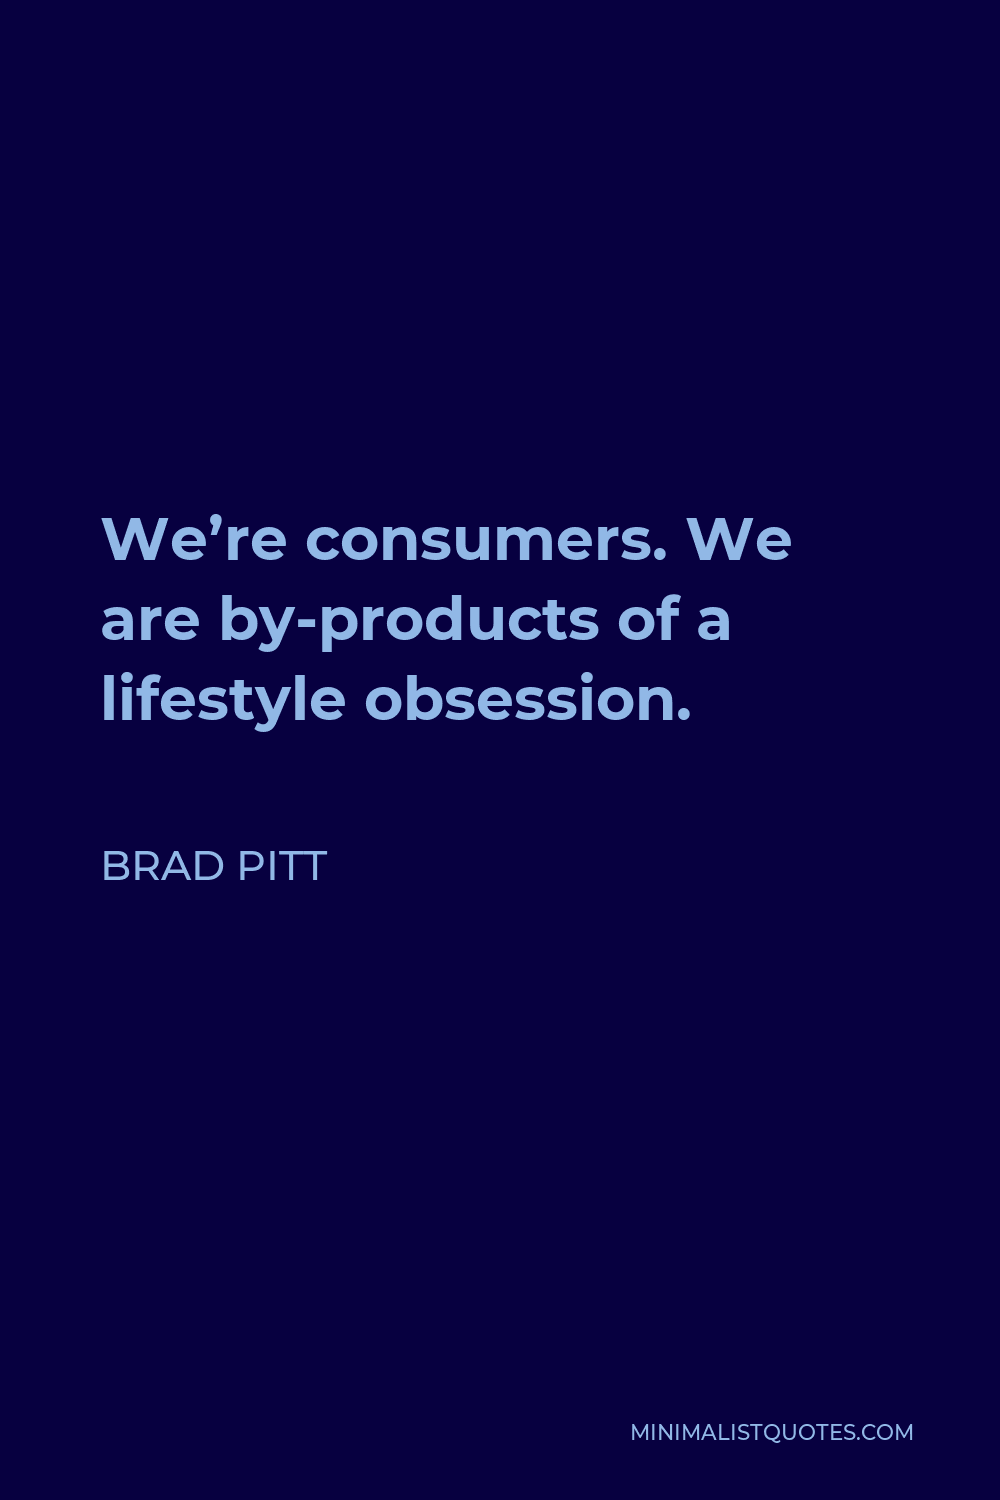 Brad Pitt Quote - We’re consumers. We are by-products of a lifestyle obsession.